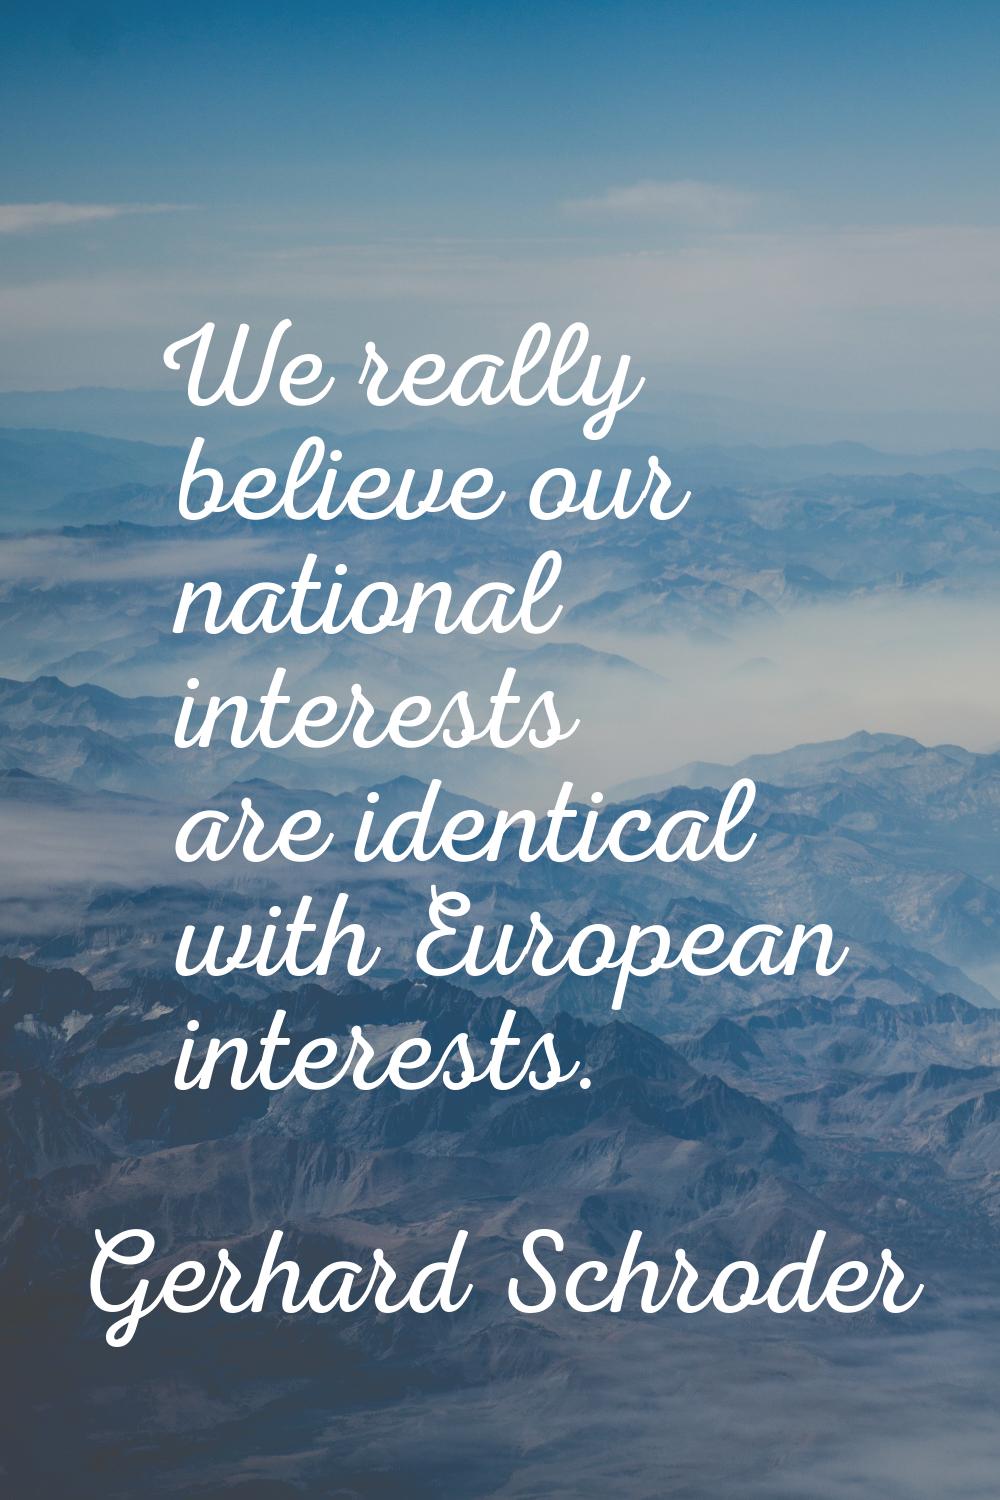 We really believe our national interests are identical with European interests.